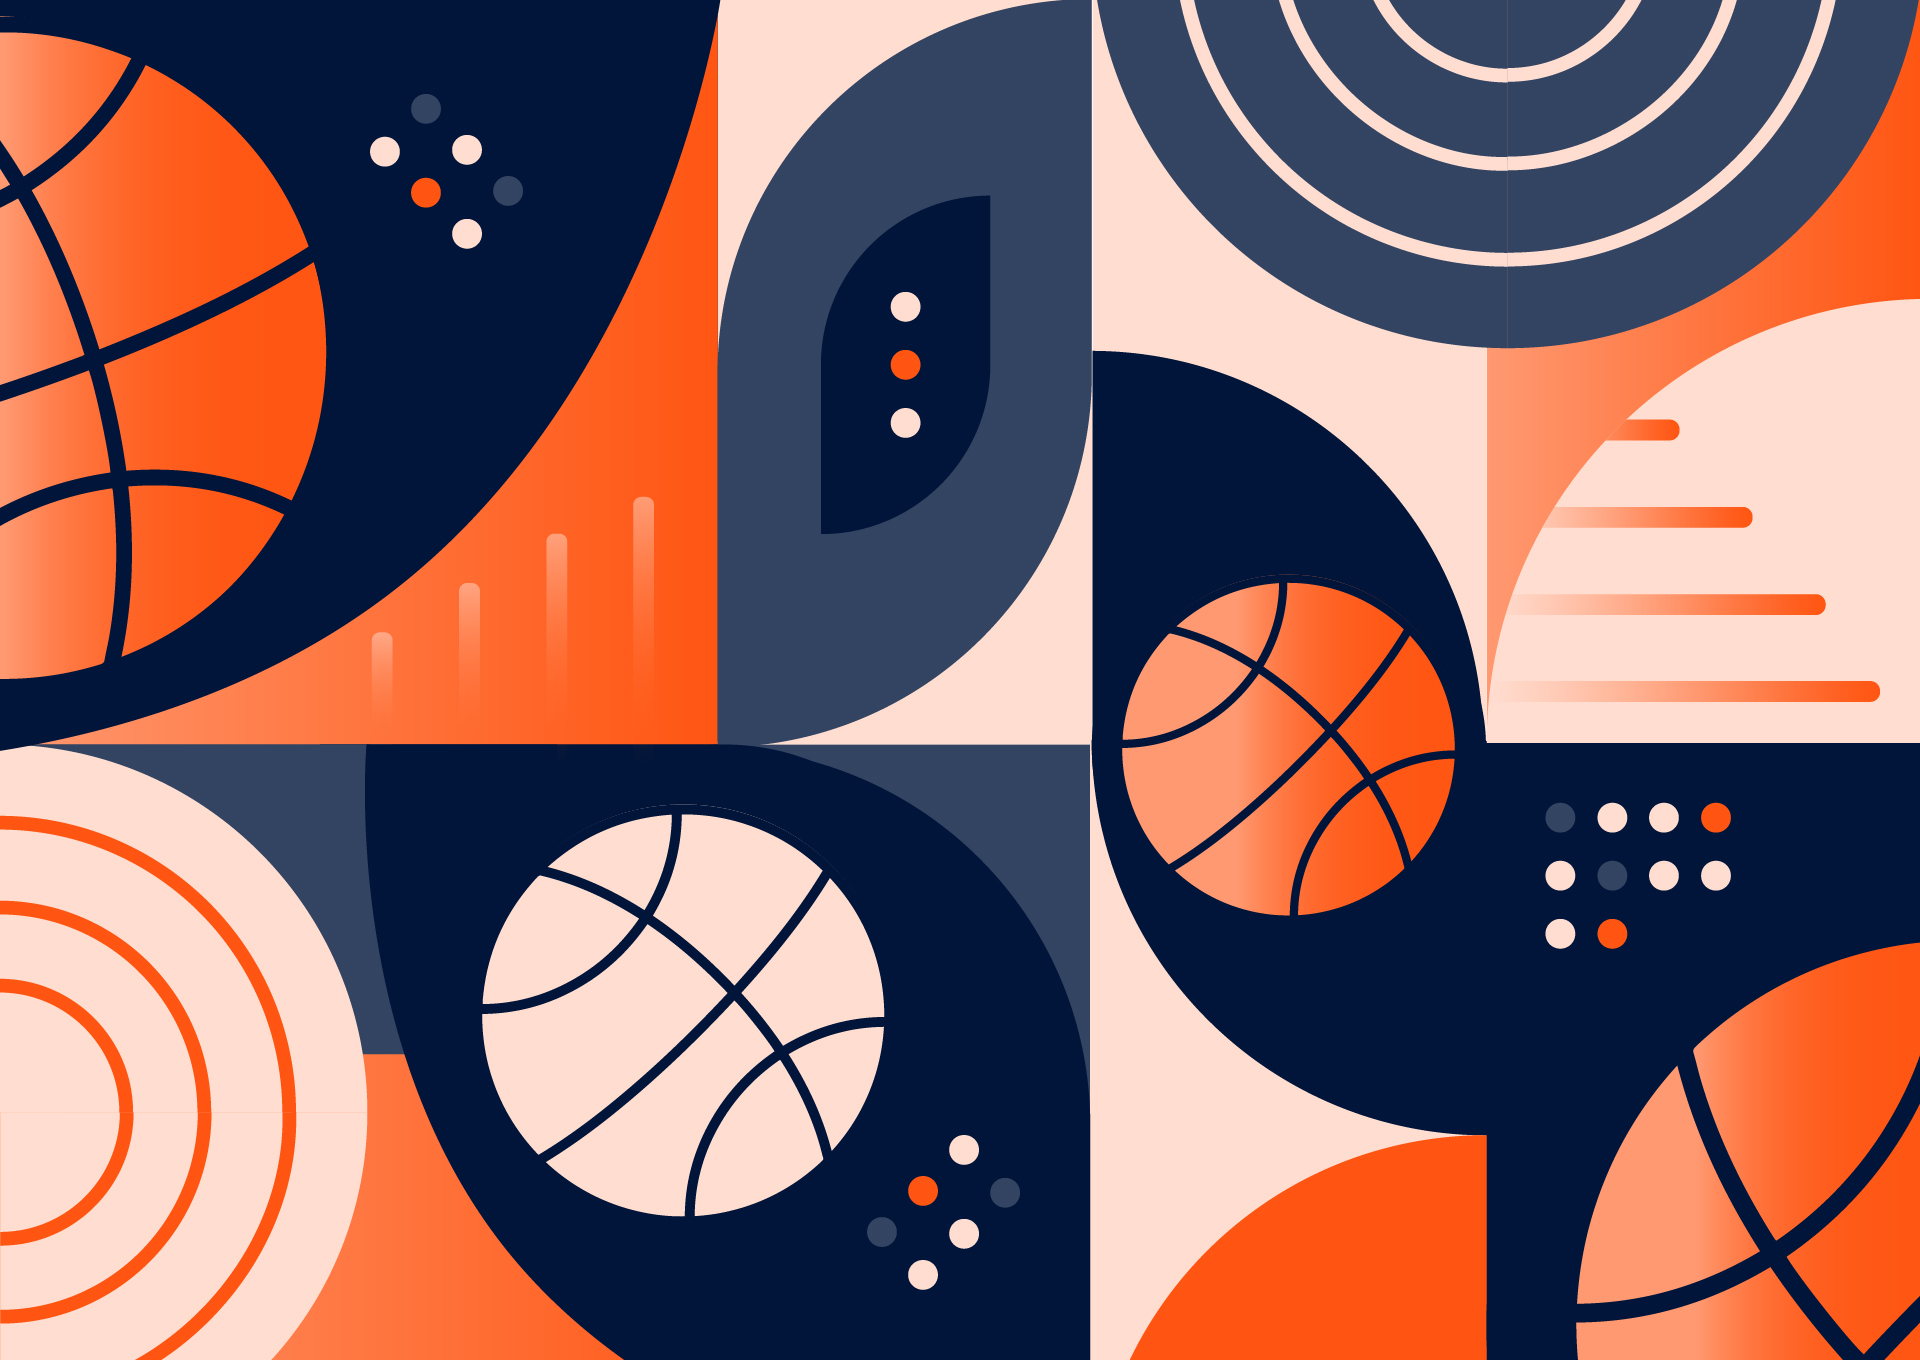 Graphic of basketballs and shapes